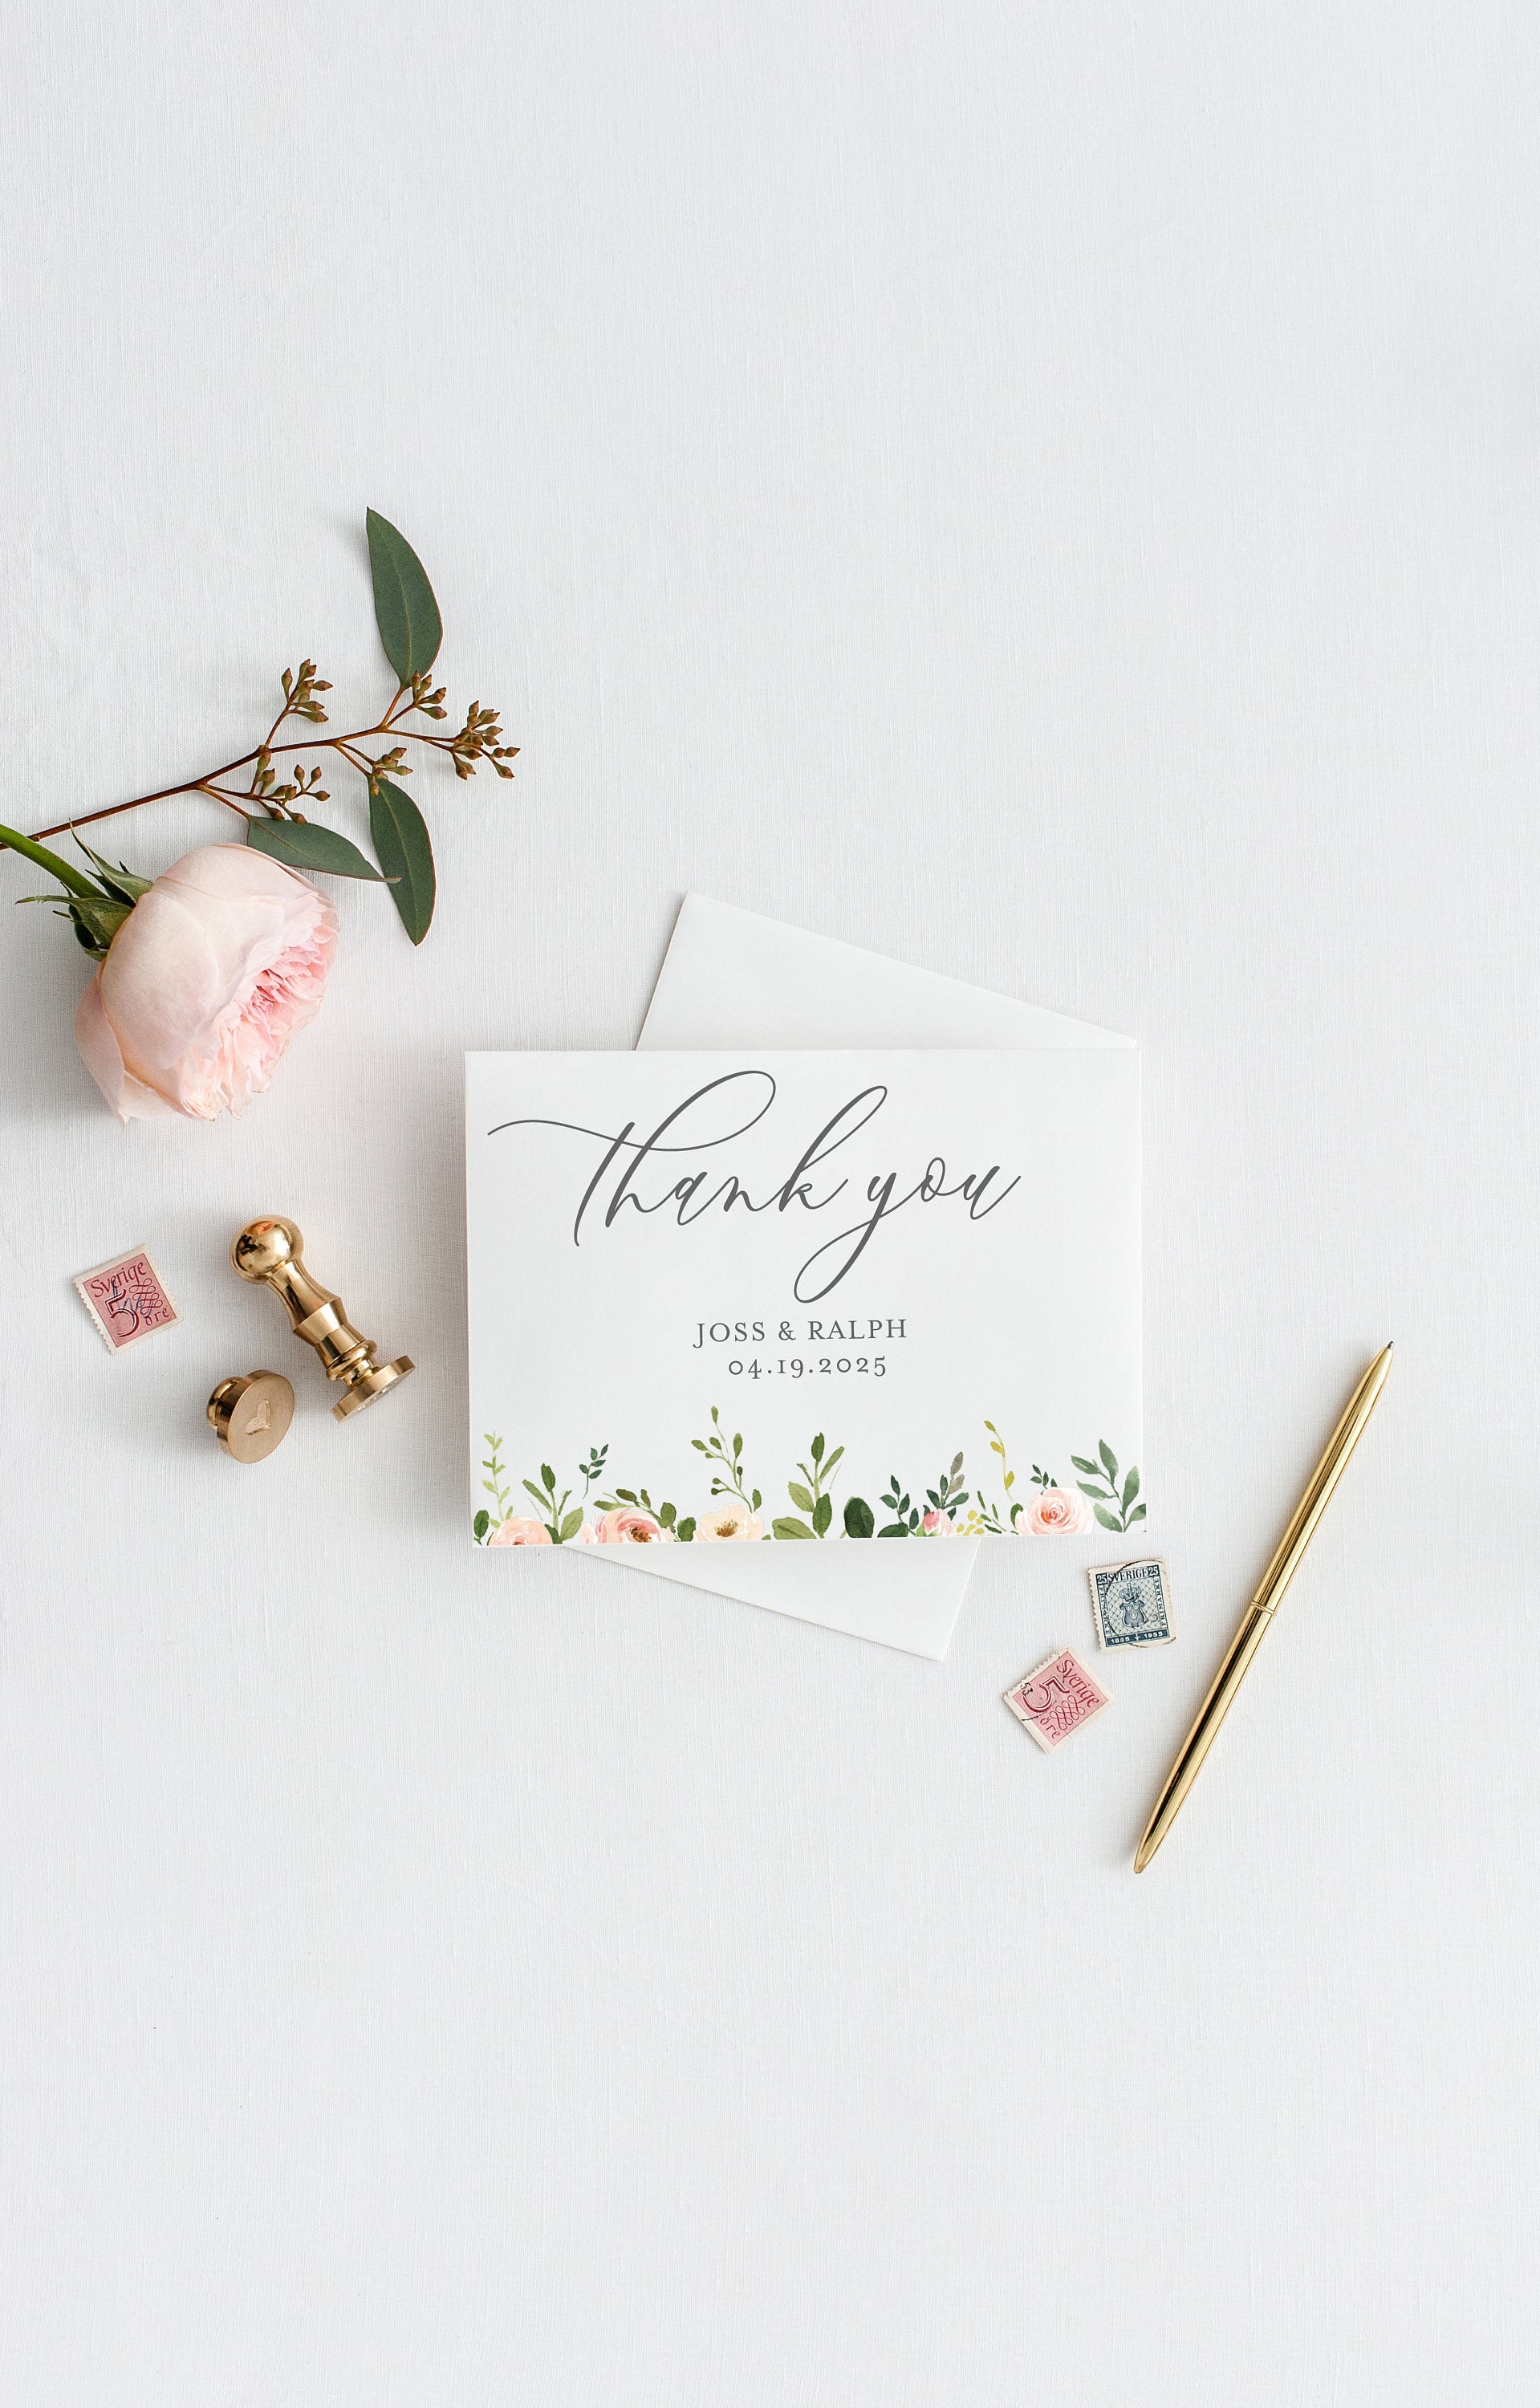 Elegant Wedding Thank You Card, Instant Download, Thank you Cards, Printable Thank You, Wedding Cards, Calligraphy, Greenery  - JESS TAGS | TY | INSERTS SAVVY PAPER CO